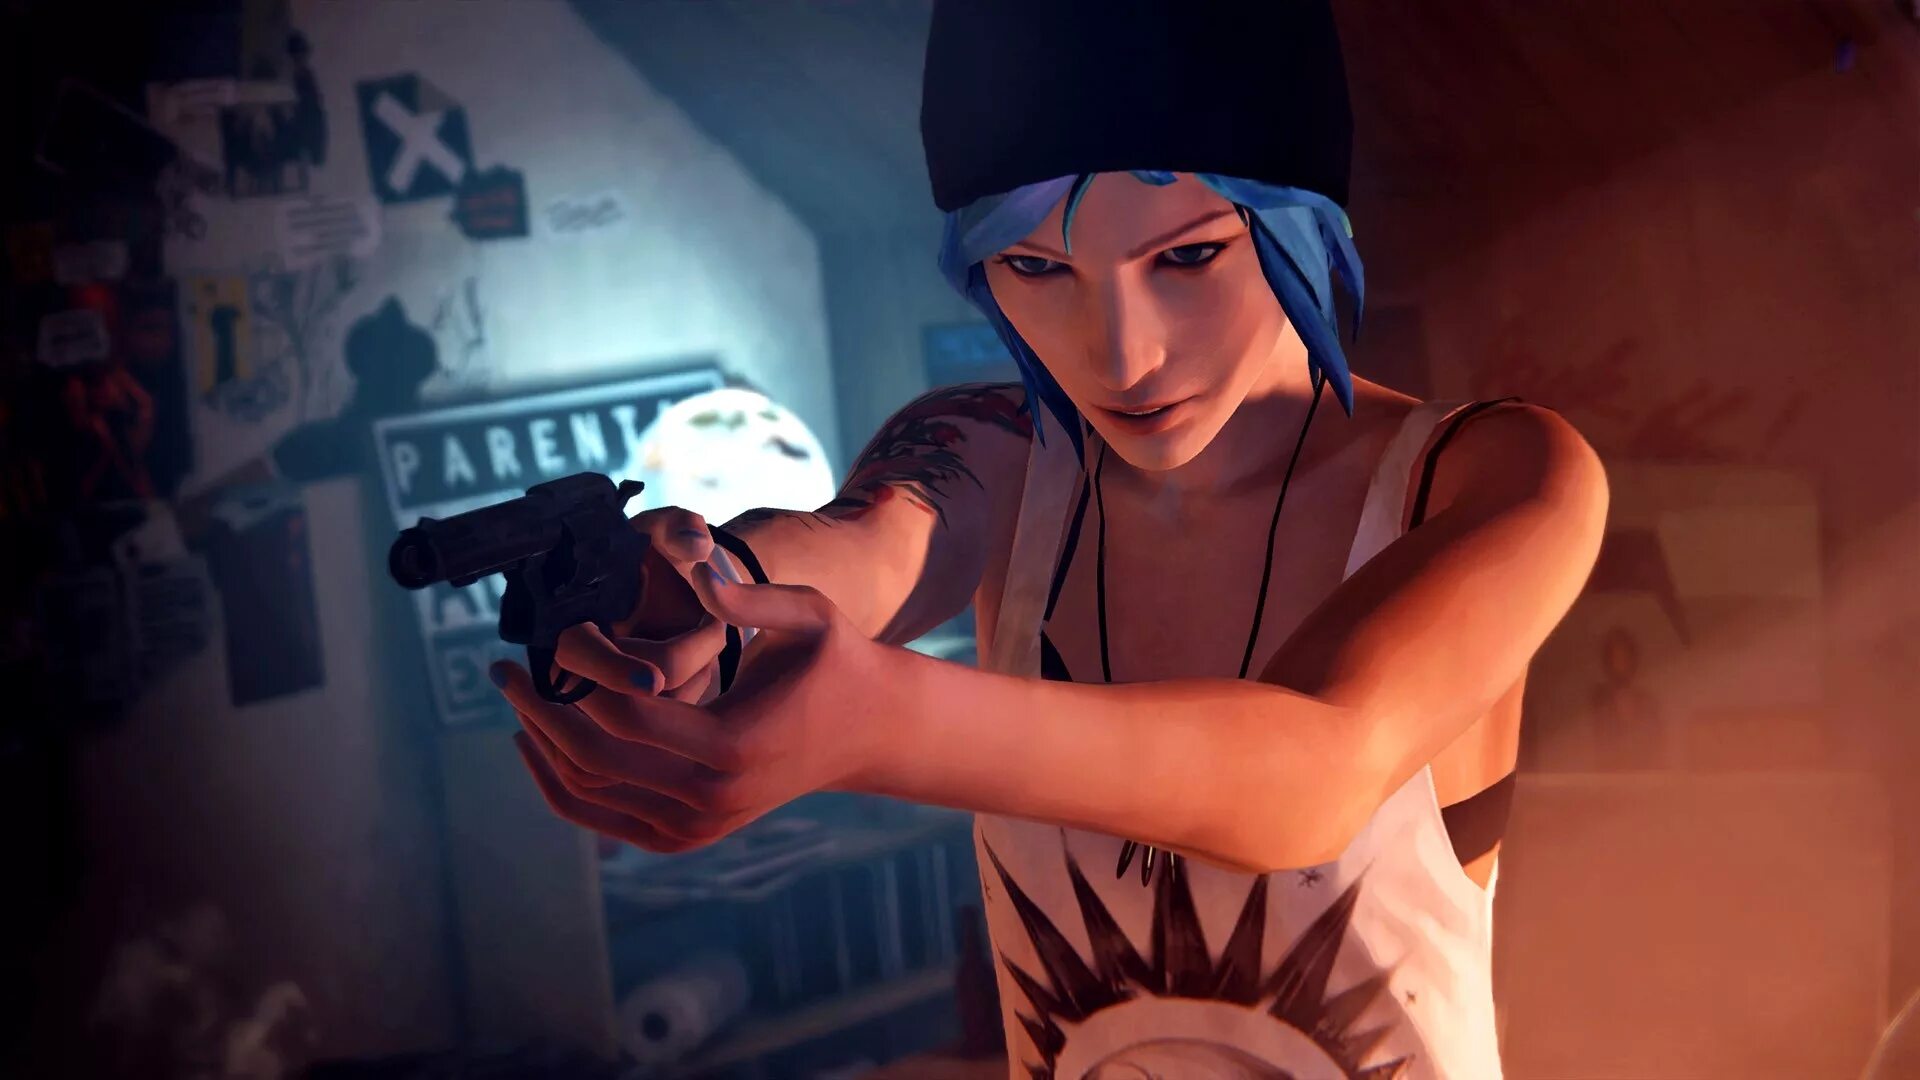 Life is searching. Лайф ИС Стрендж. Игра Life is Strange 1. Life is Strange Chloe Price.